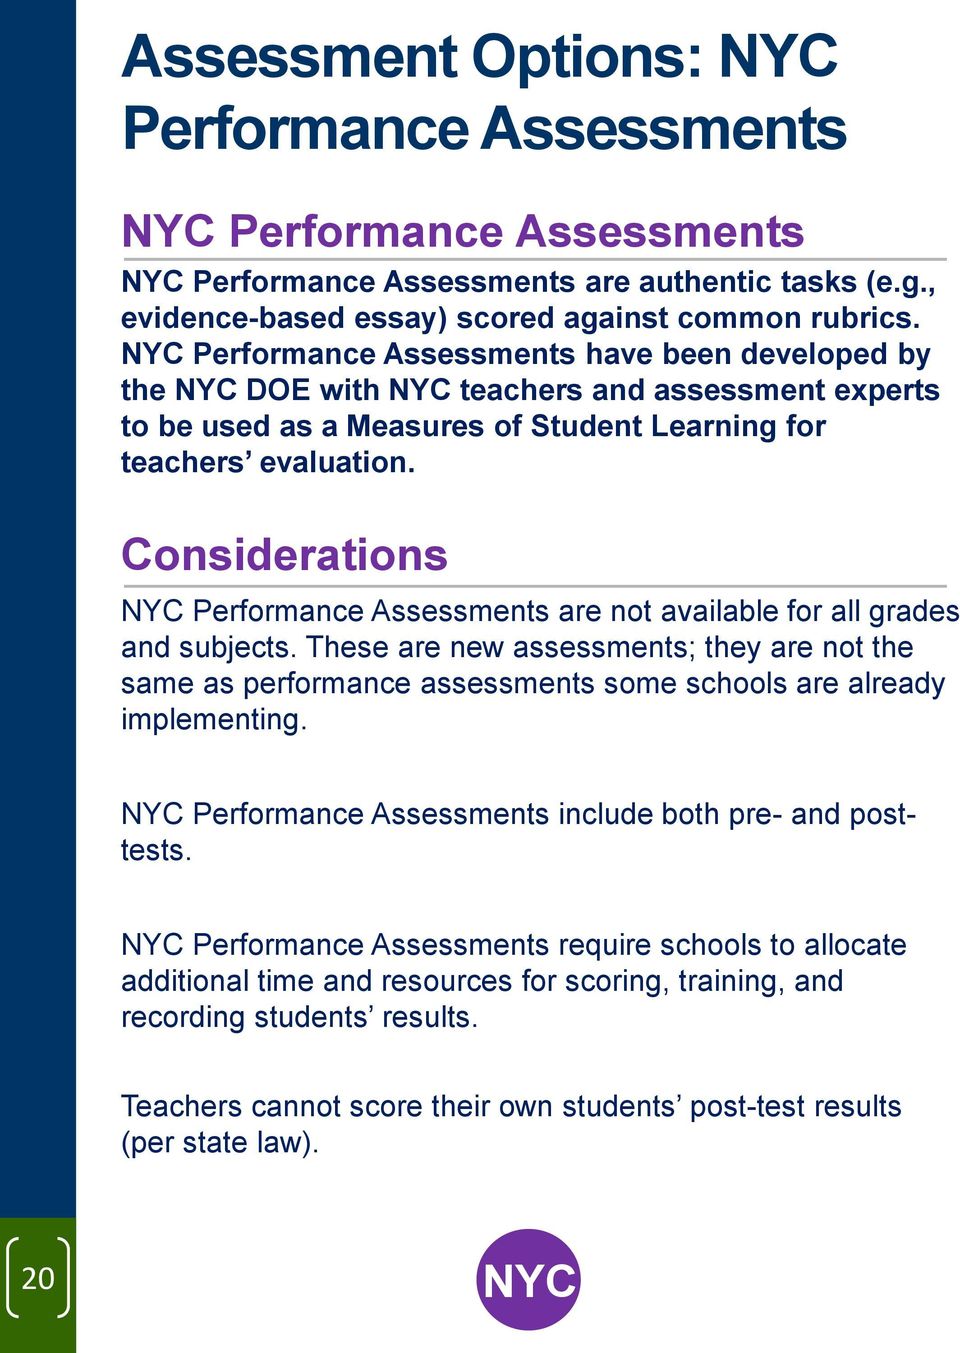 Considerations NYC Performance Assessments are not available for all grades and subjects.